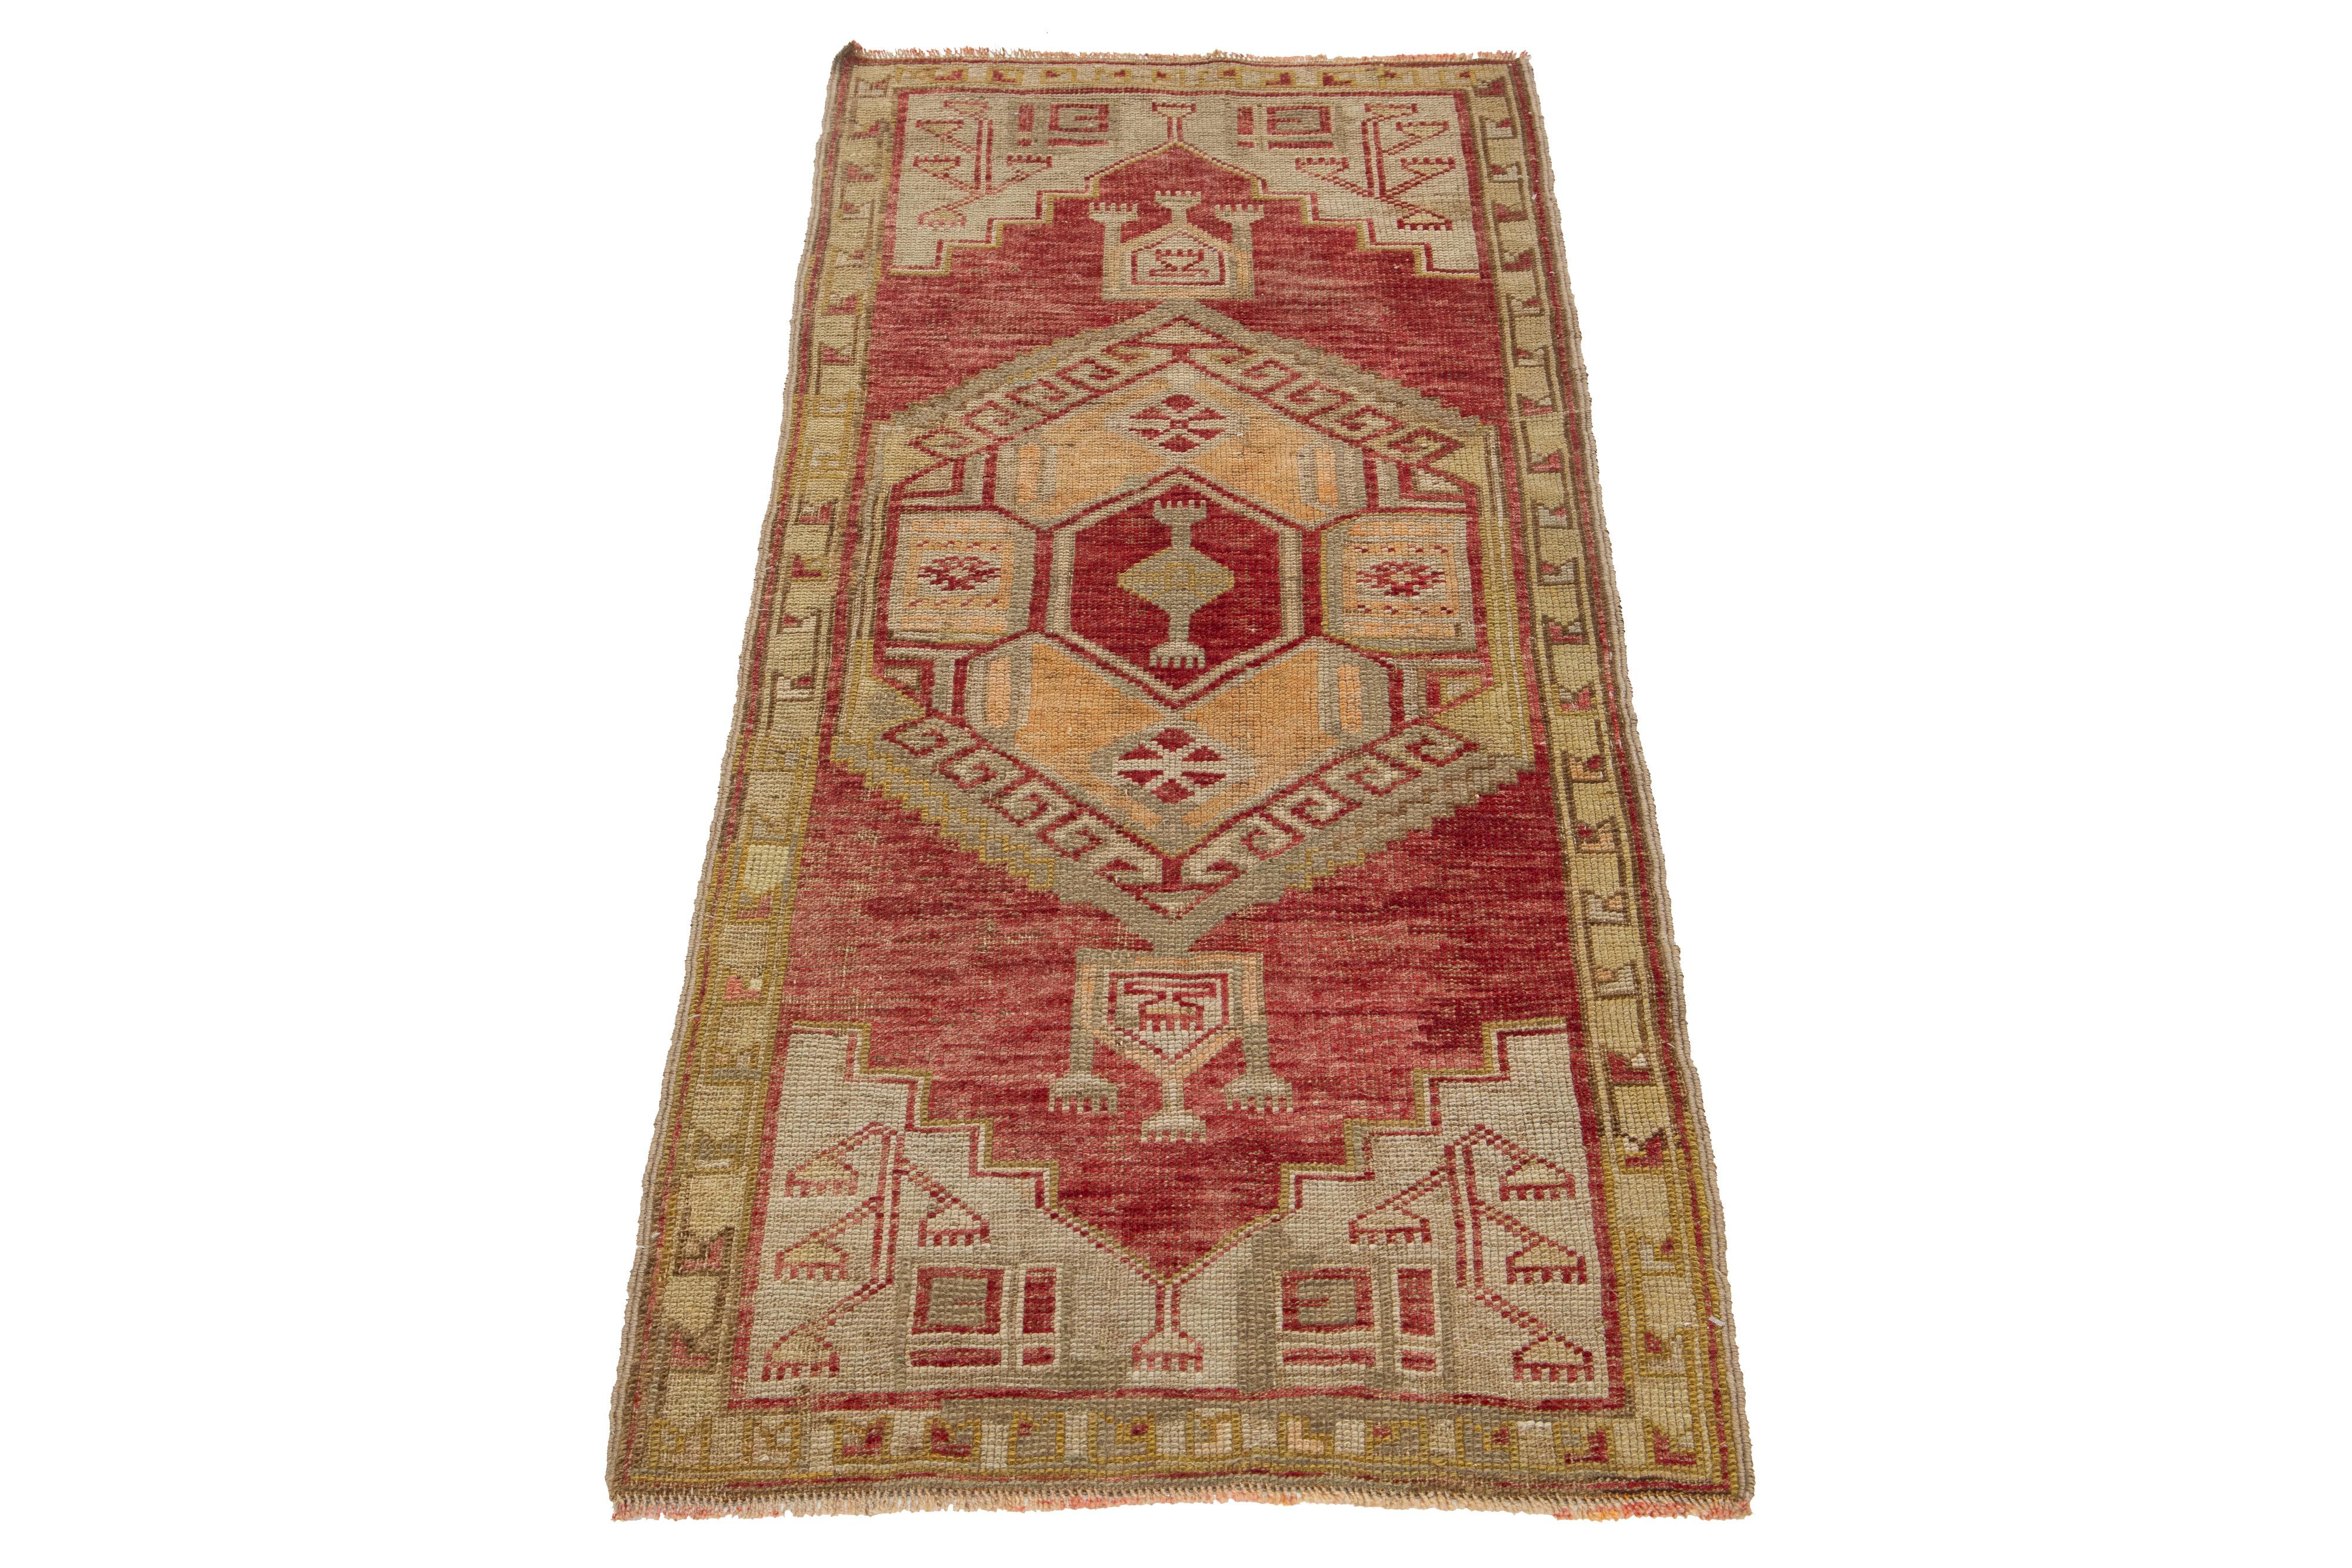 Beautiful vintage Anatolian hand-knotted wool rug featuring a red color field. This piece showcases beige, brown, and peach accents within a stunning geometric tribal design.

This rug measures 2'3